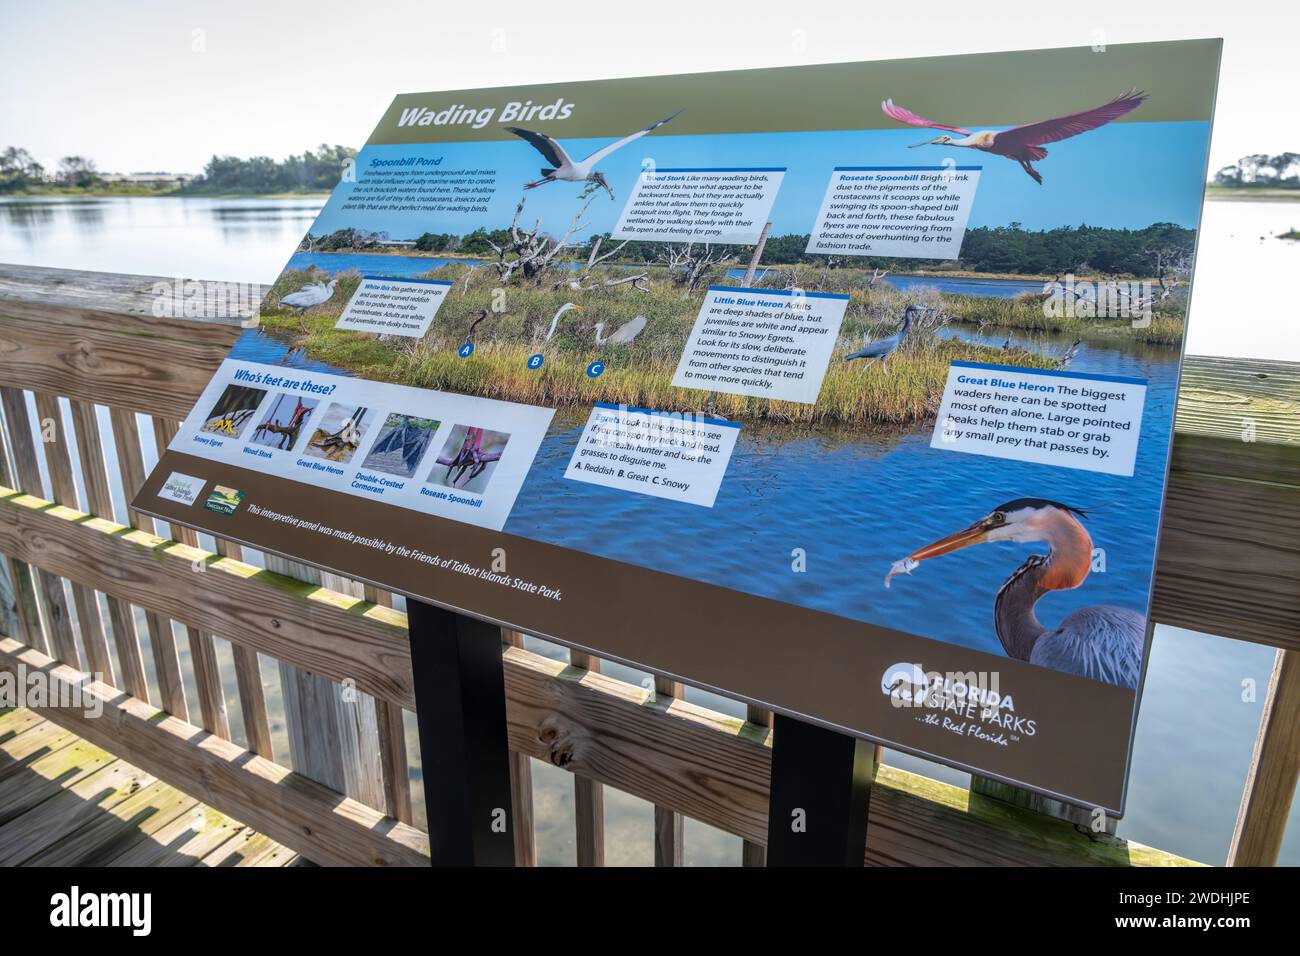 Birdwatching station along the Spoonbill Pond boardwalk at Big Talbot Island State Park along Florida A1A Scenic & Historic Coastal Byway. (USA) Stock Photo